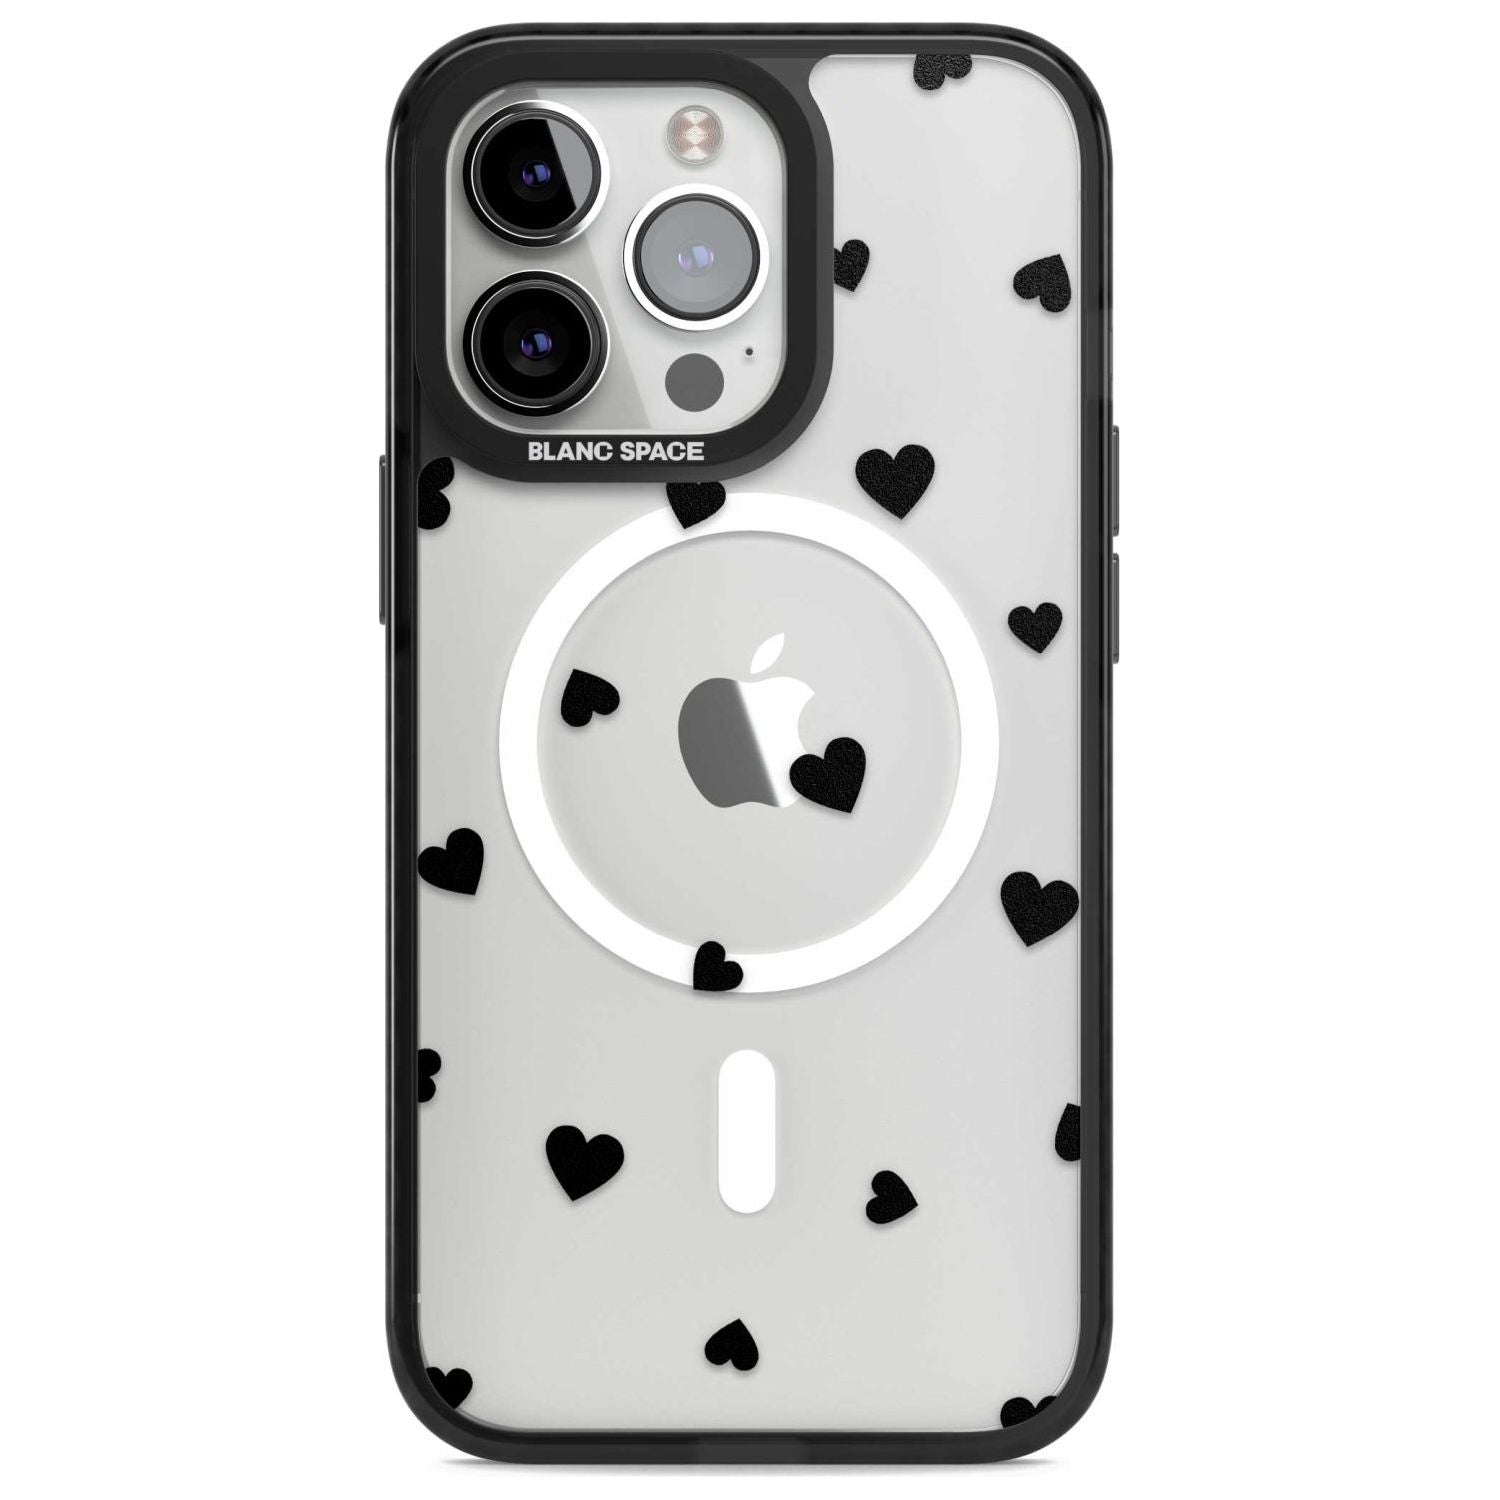 Black Hearts Pattern Phone Case iPhone 15 Pro Max / Magsafe Black Impact Case,iPhone 15 Pro / Magsafe Black Impact Case,iPhone 14 Pro Max / Magsafe Black Impact Case,iPhone 14 Pro / Magsafe Black Impact Case,iPhone 13 Pro / Magsafe Black Impact Case Blanc Space